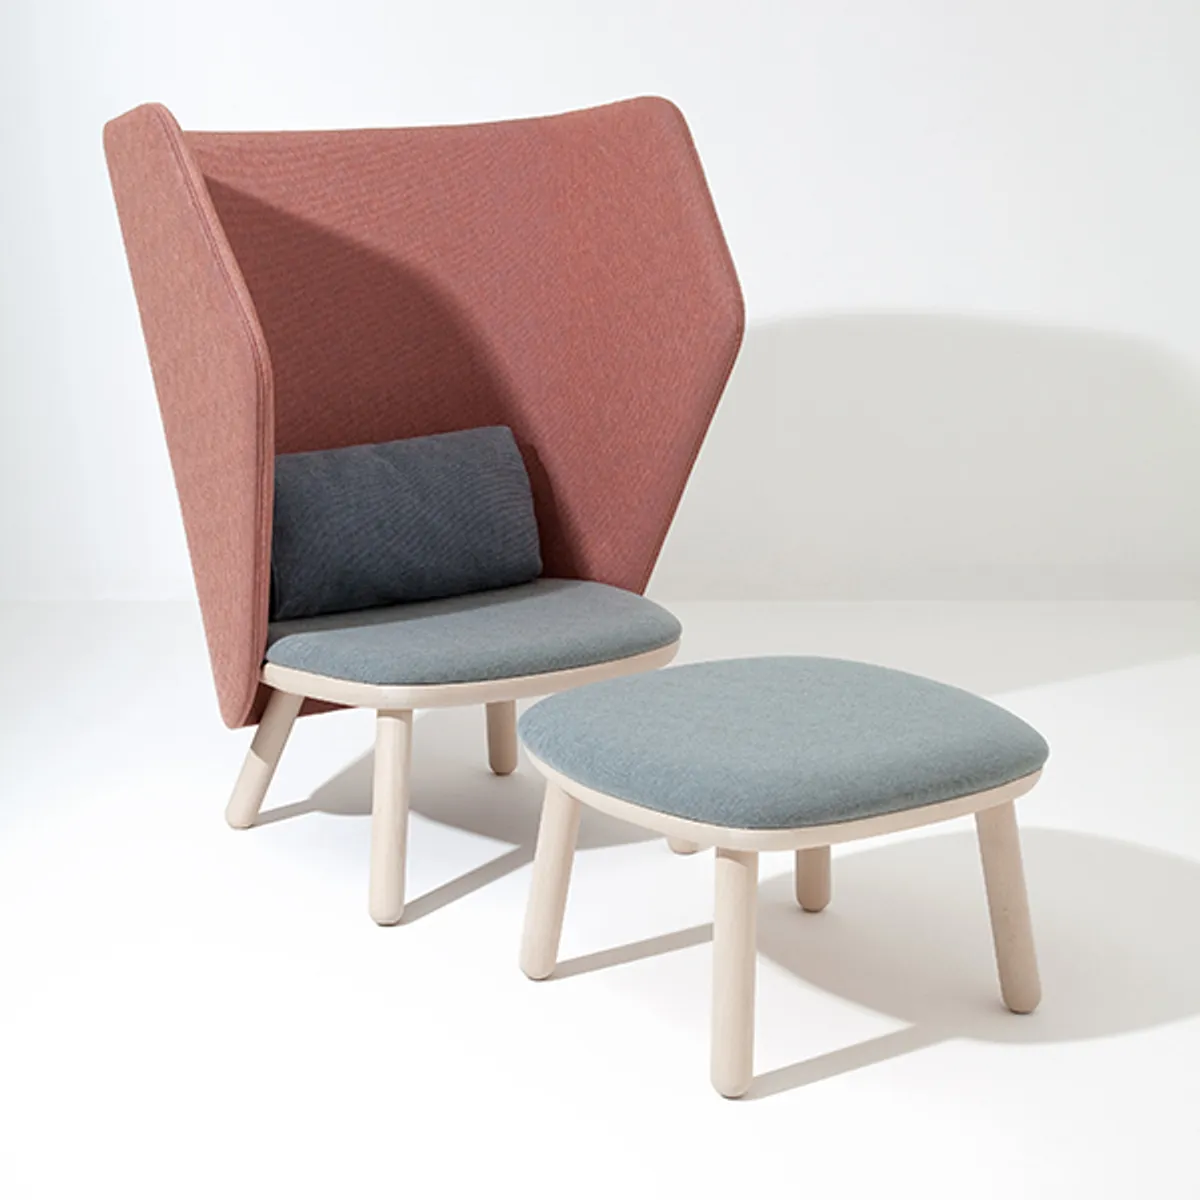 Ikkoku Lounge Chair And Footstool Private Pod Chair Inside Out Contracts